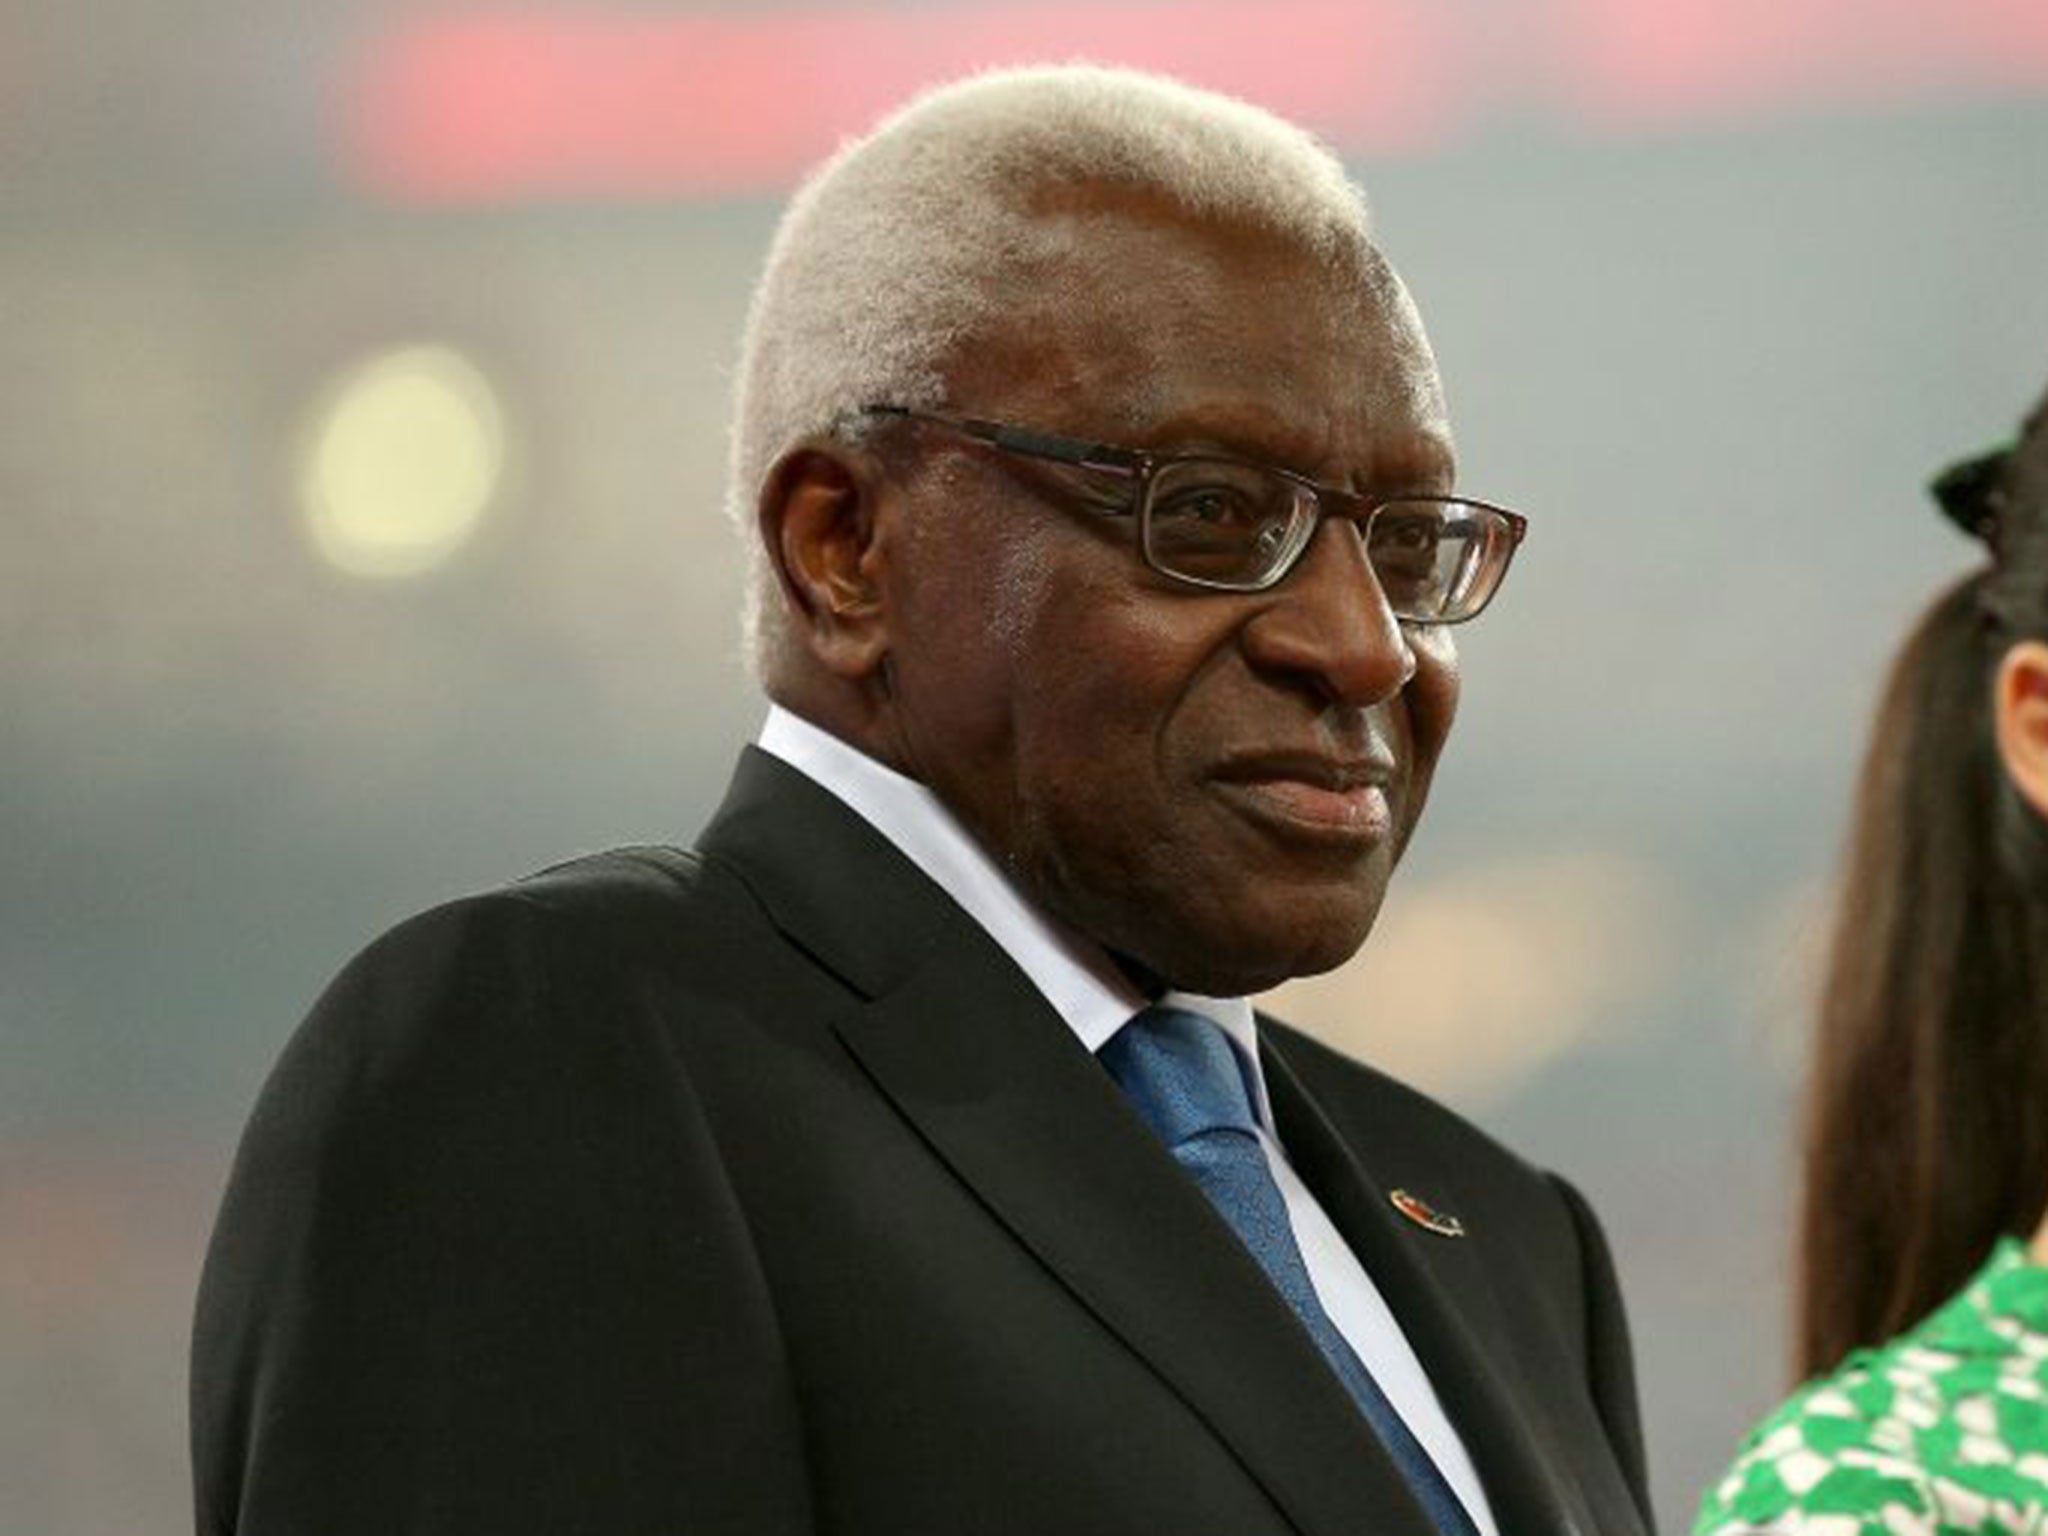 Lamine Diack, the former IAAF president, agreed to a council vote in April which selected Eugene